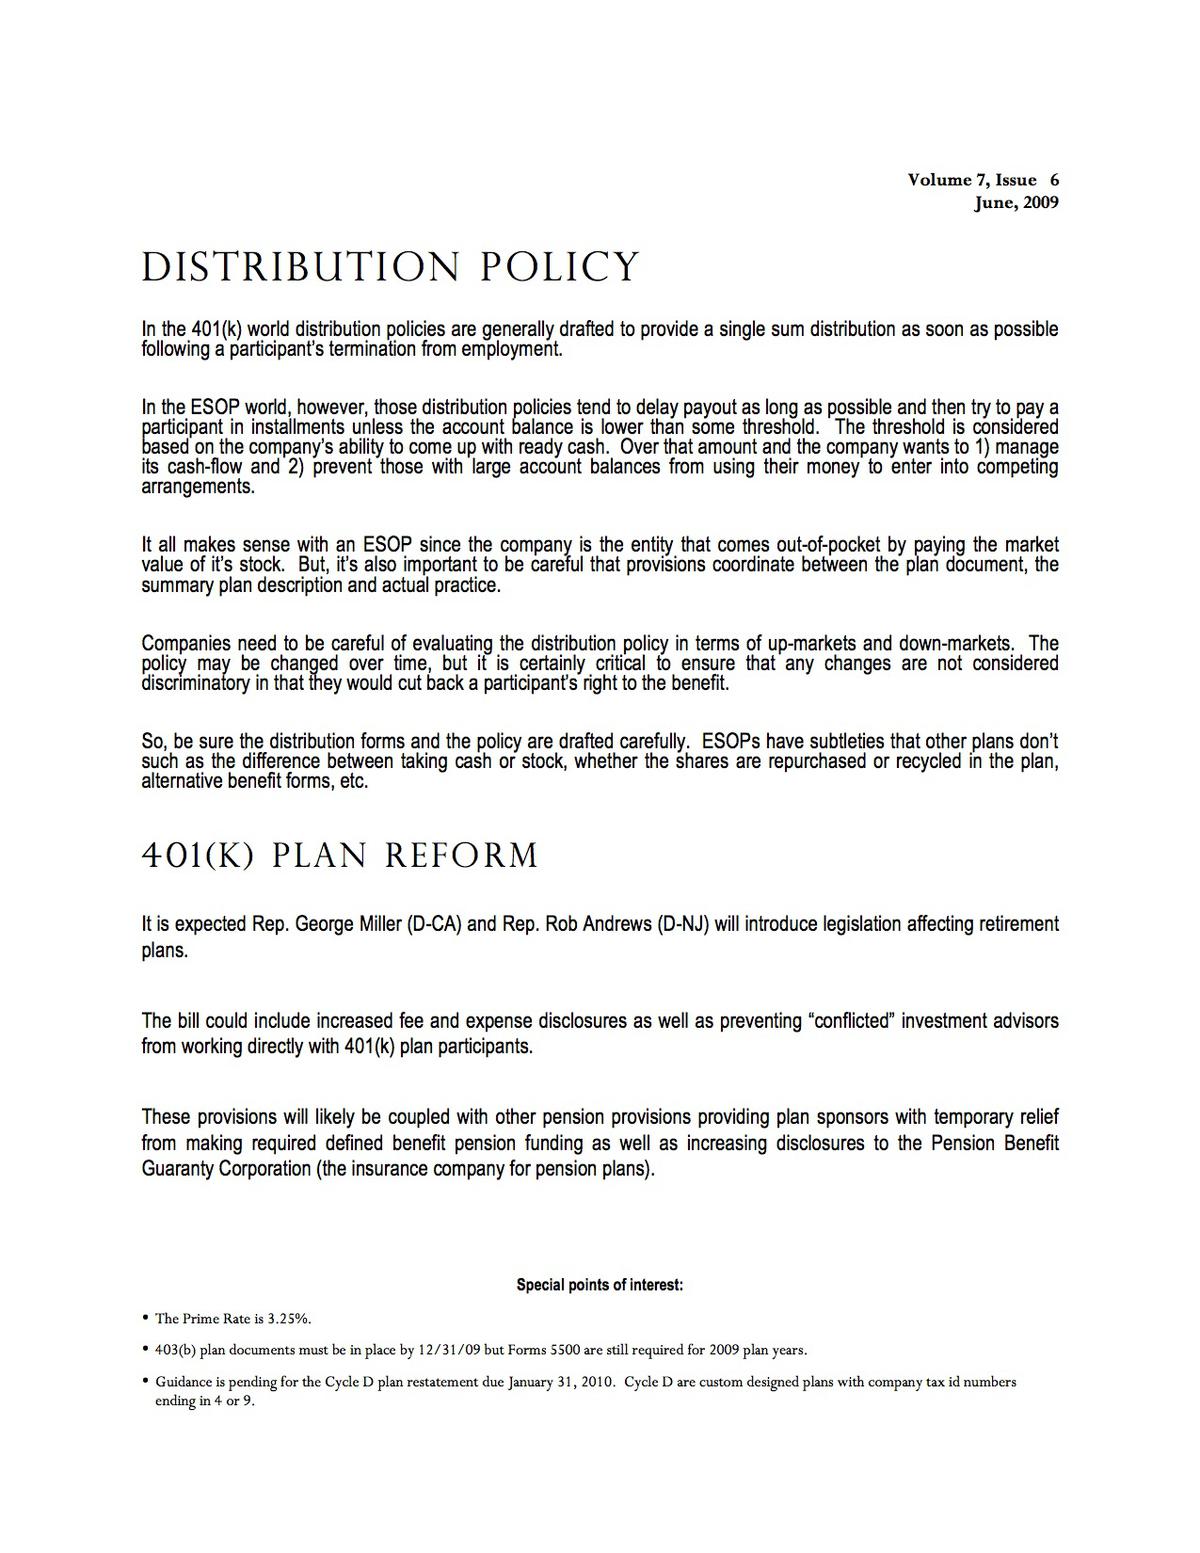 Distribution Policy